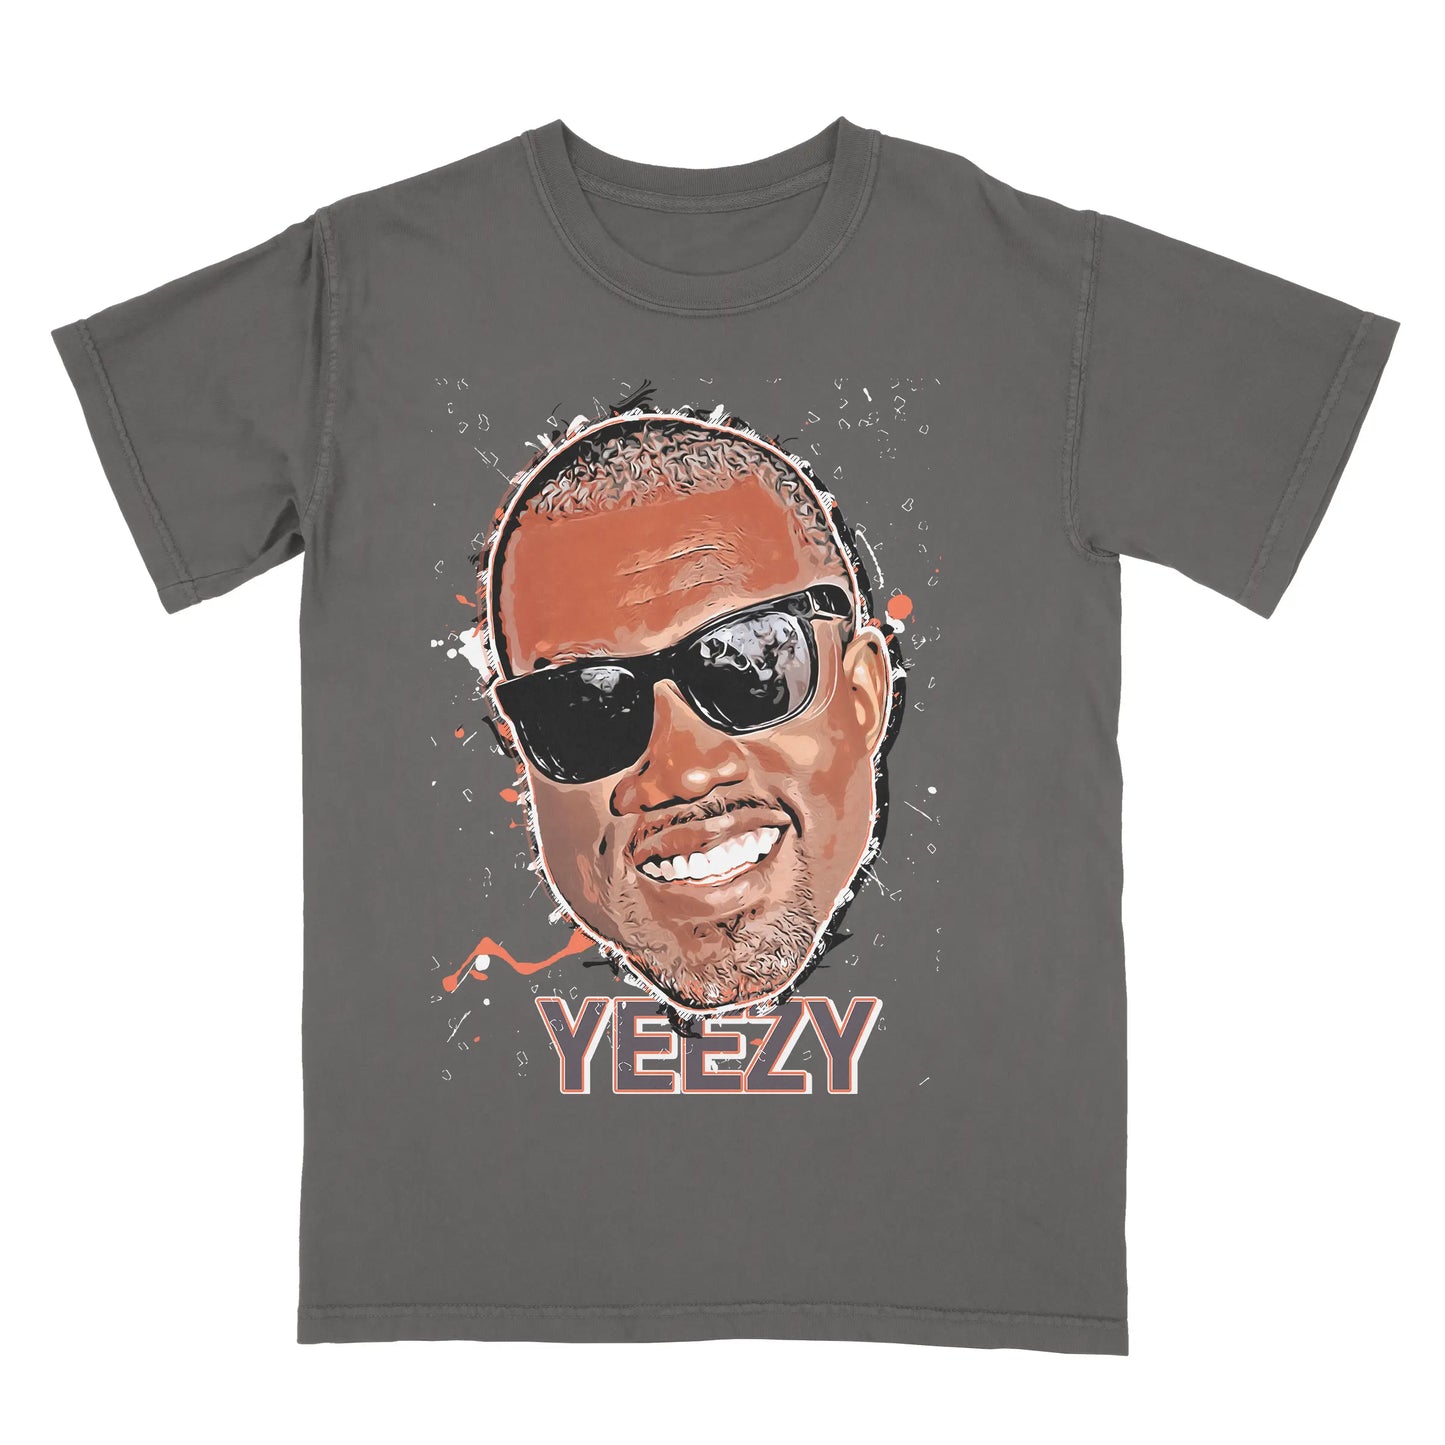 Limited Edition Yeezy Graphic T-shirt